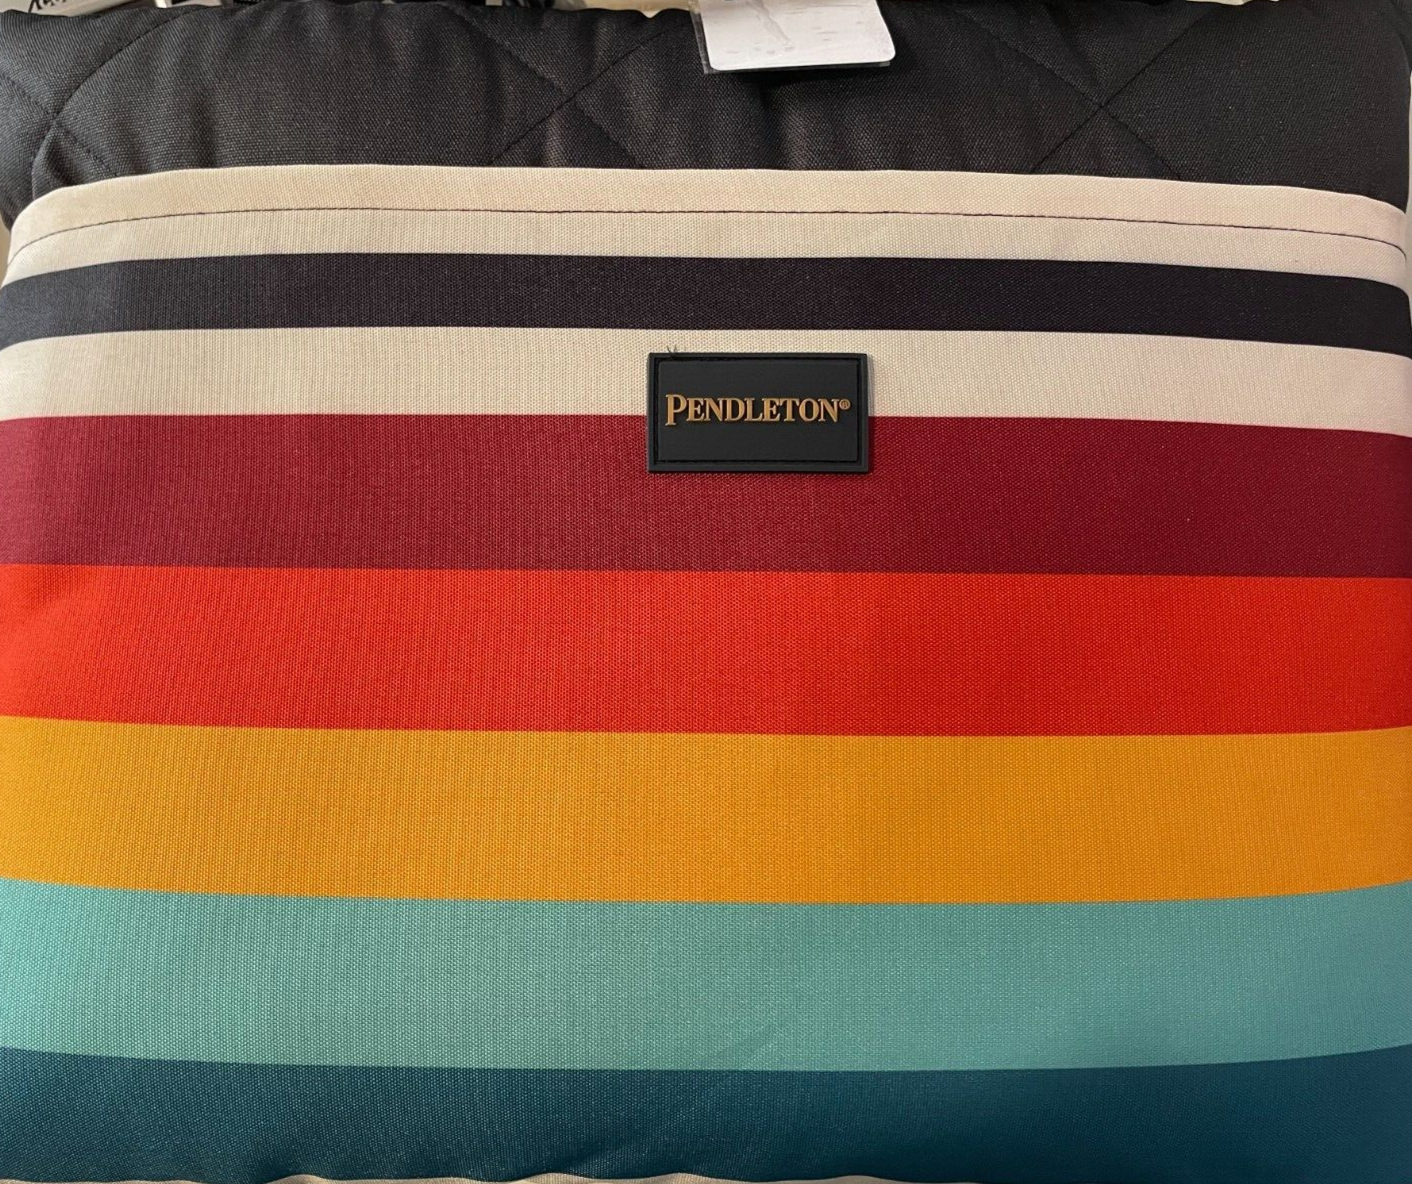 Primary image for PENDLETON  Outdoor Packable Picnic Camping Blanket 60”x72” Bag